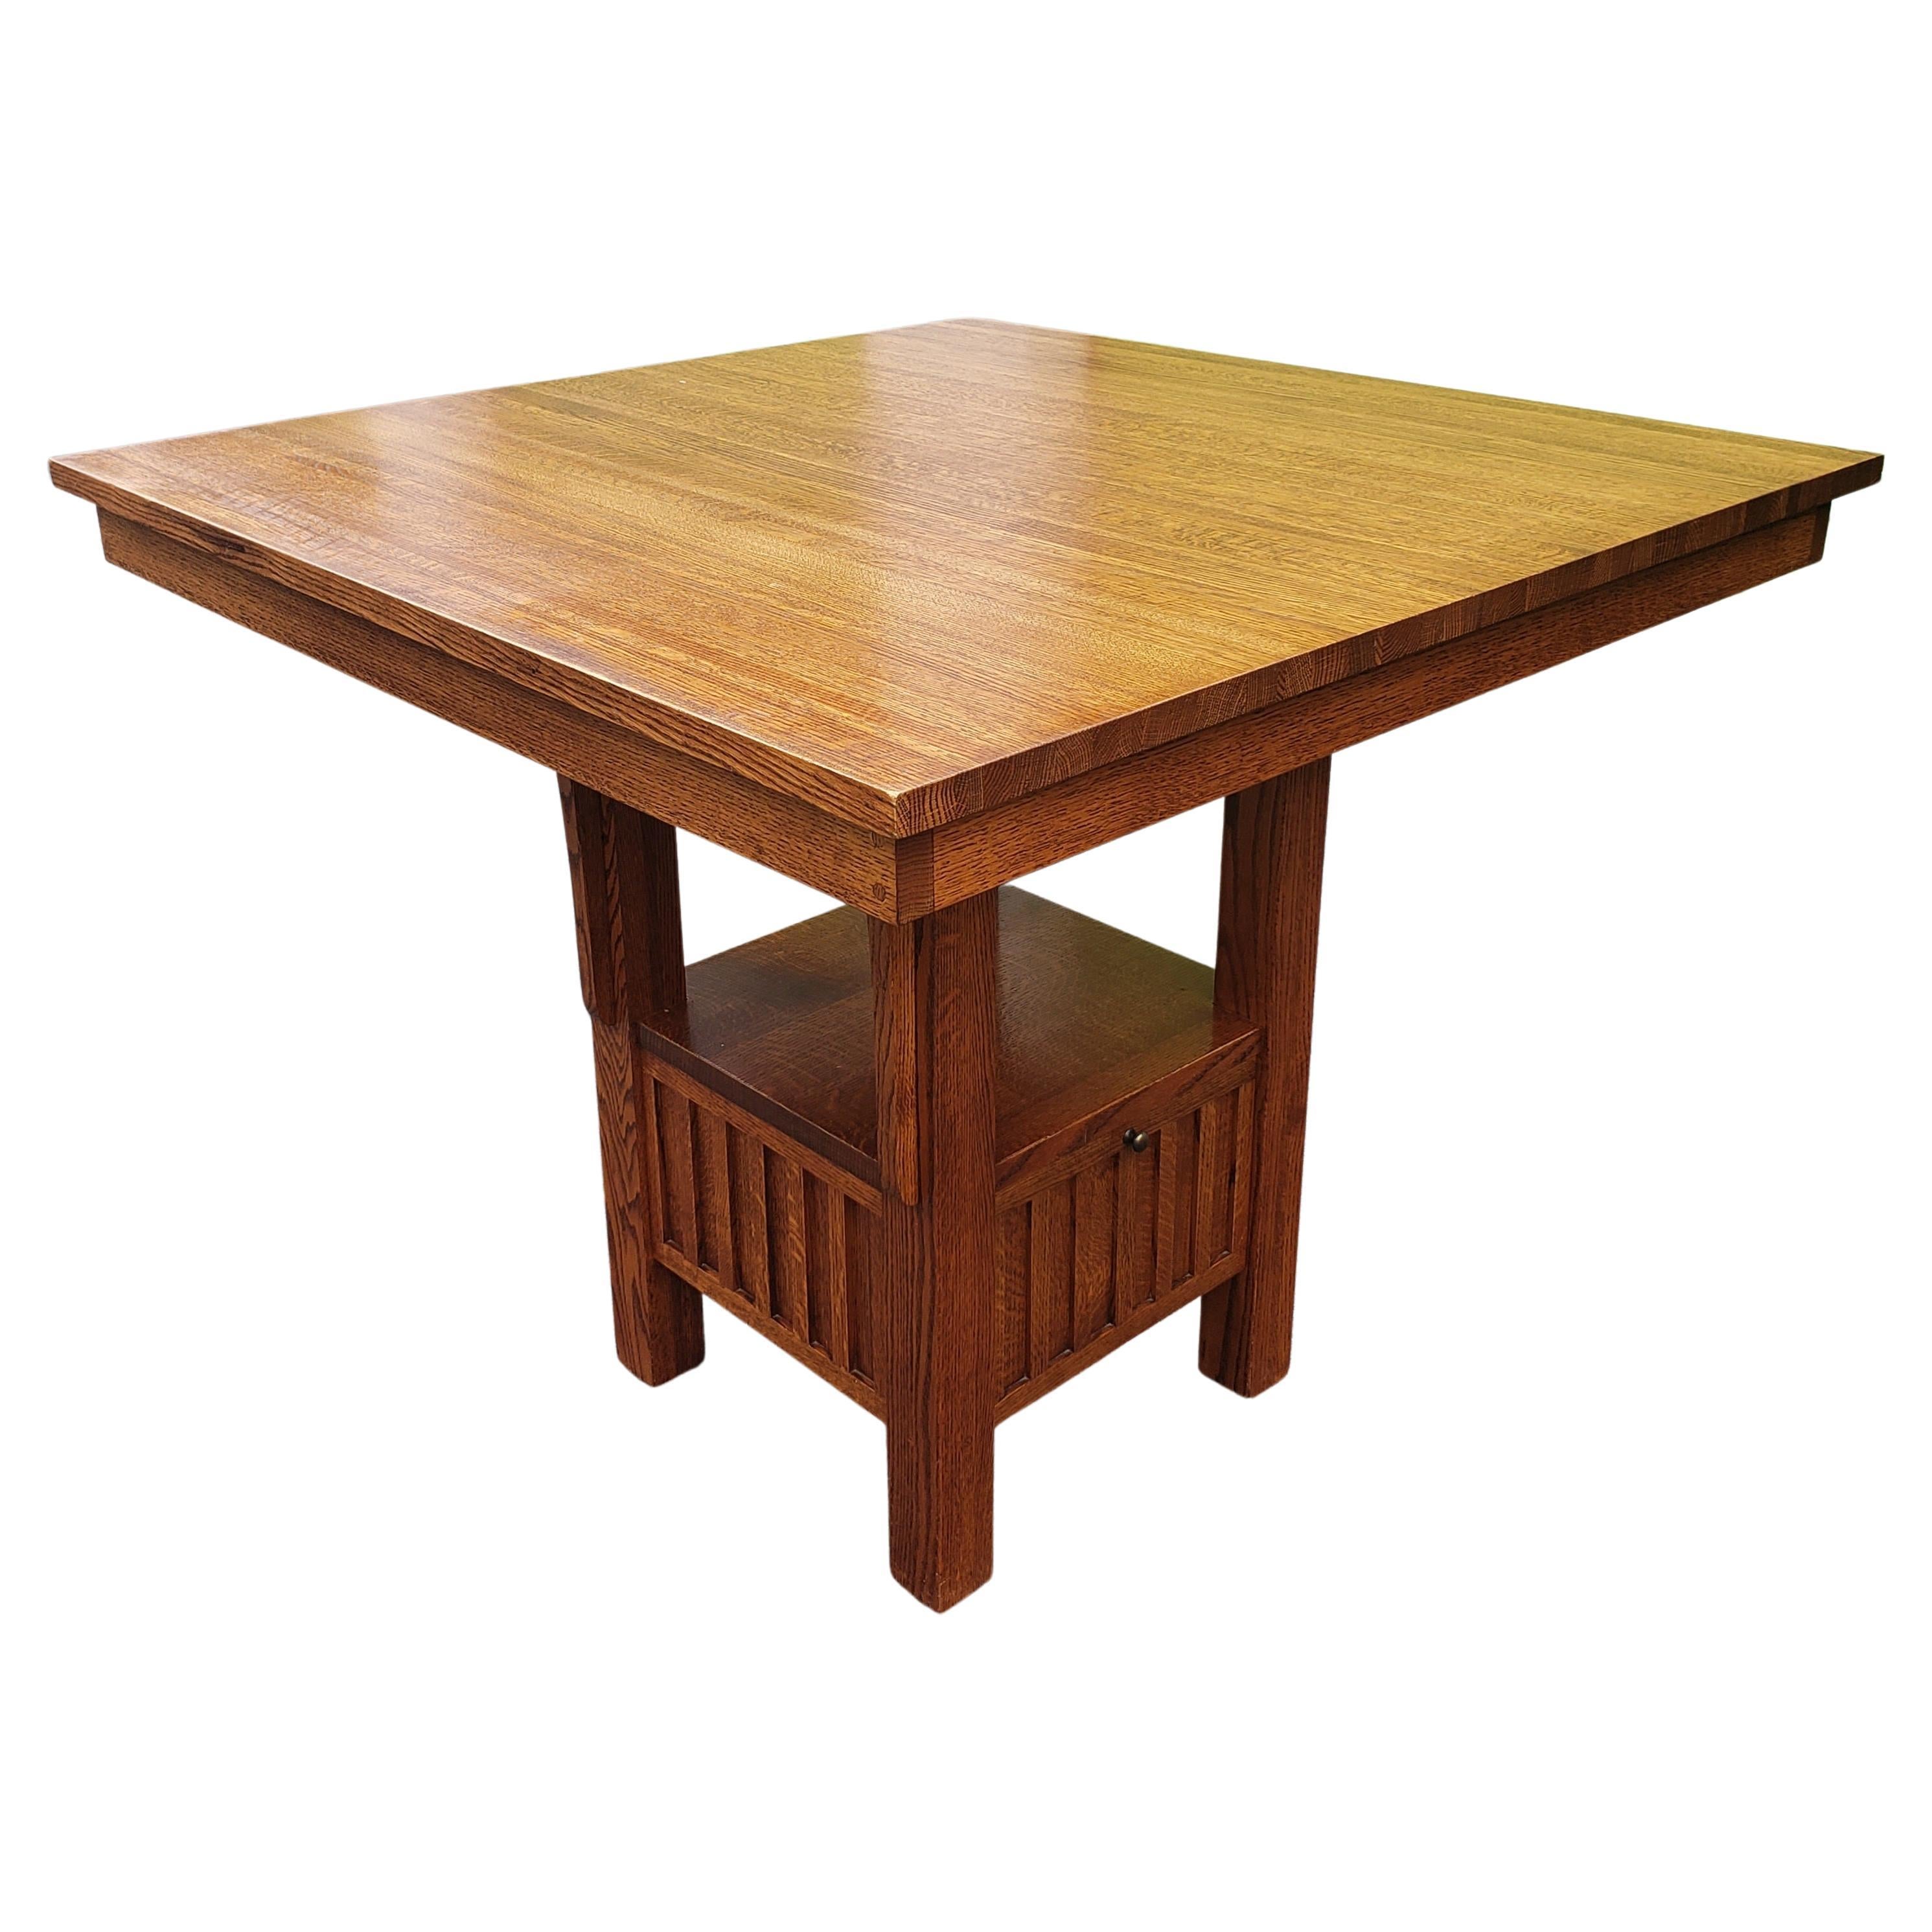 Stickley attributed Quarter sawn mission oak high top dining table. 
Table features a bottom large drawer for storage. Comes with custom protective pad.
Measures 42 inches wide, 42 inches in depth and stands 36.5 inches tall. Table to[ is 1inches